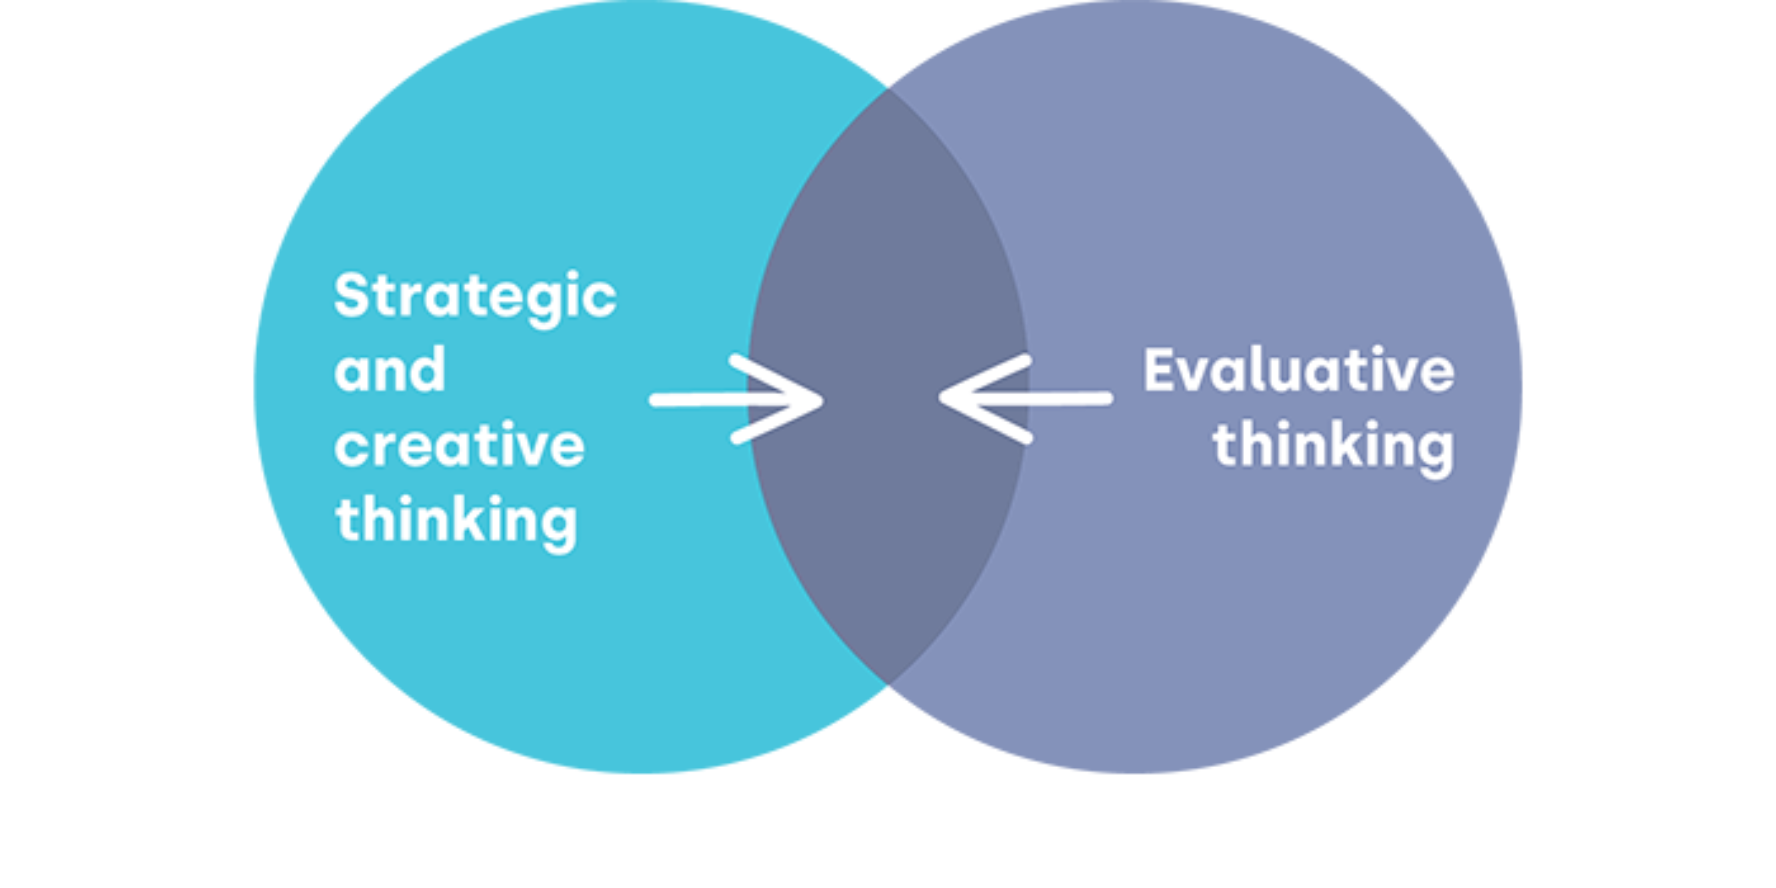 Two circles overlapping. One has the text 'Strategic and creative thinking' inside, the other, 'Evaluative thinking'.